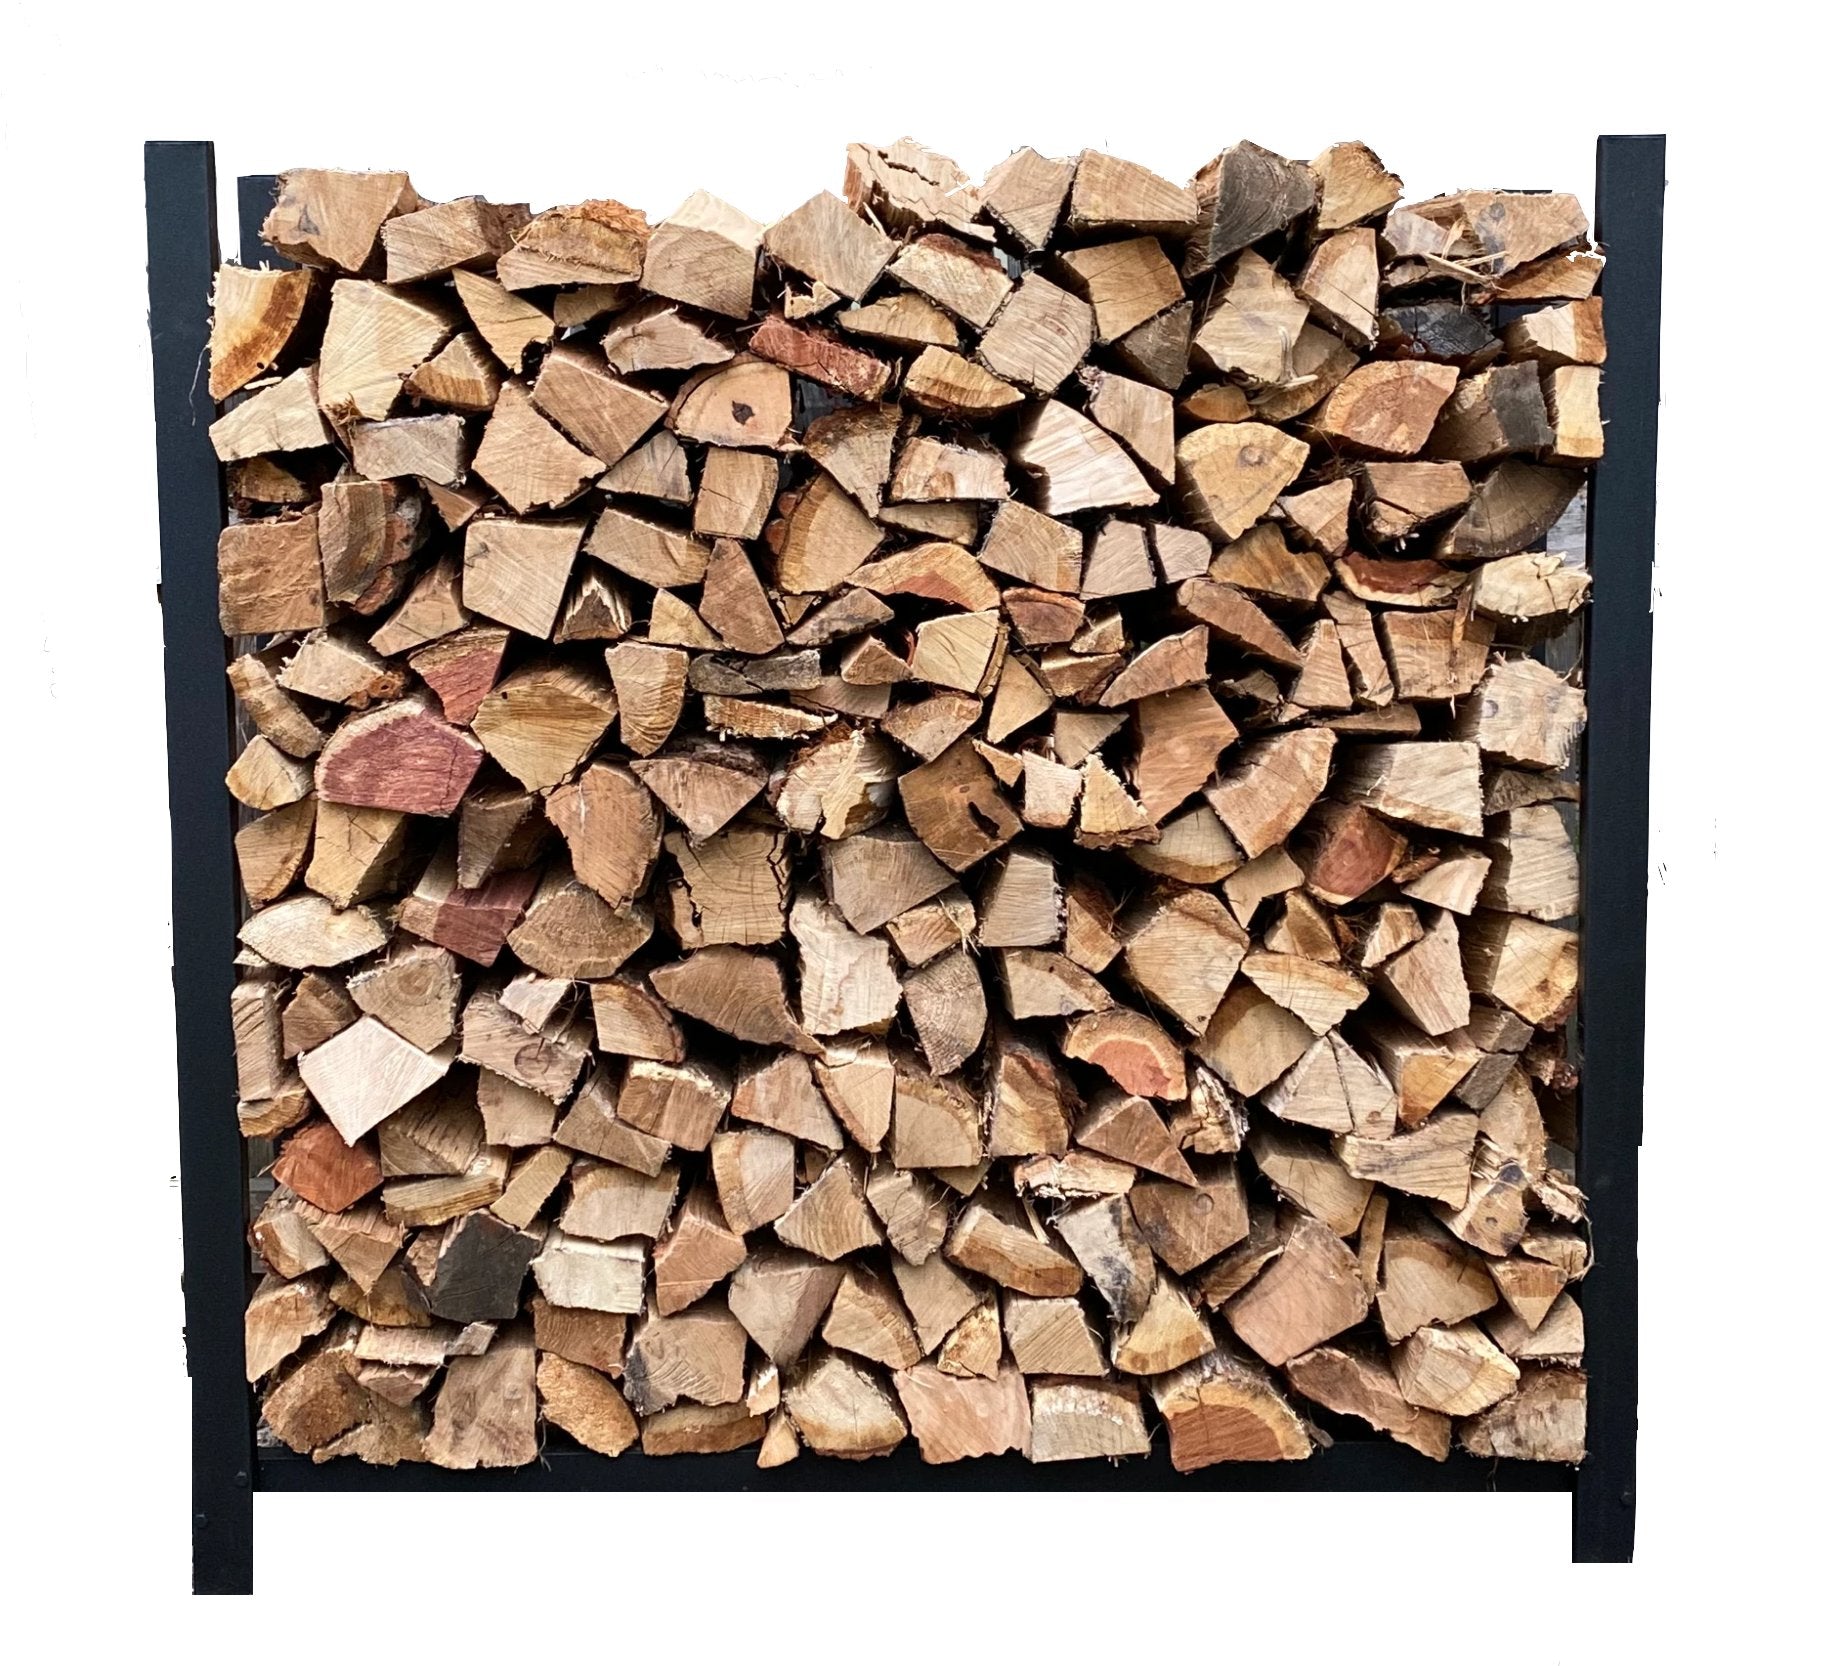 Dry Seasoned Firewood 1/4 Face Cord - 2'x4' Stack